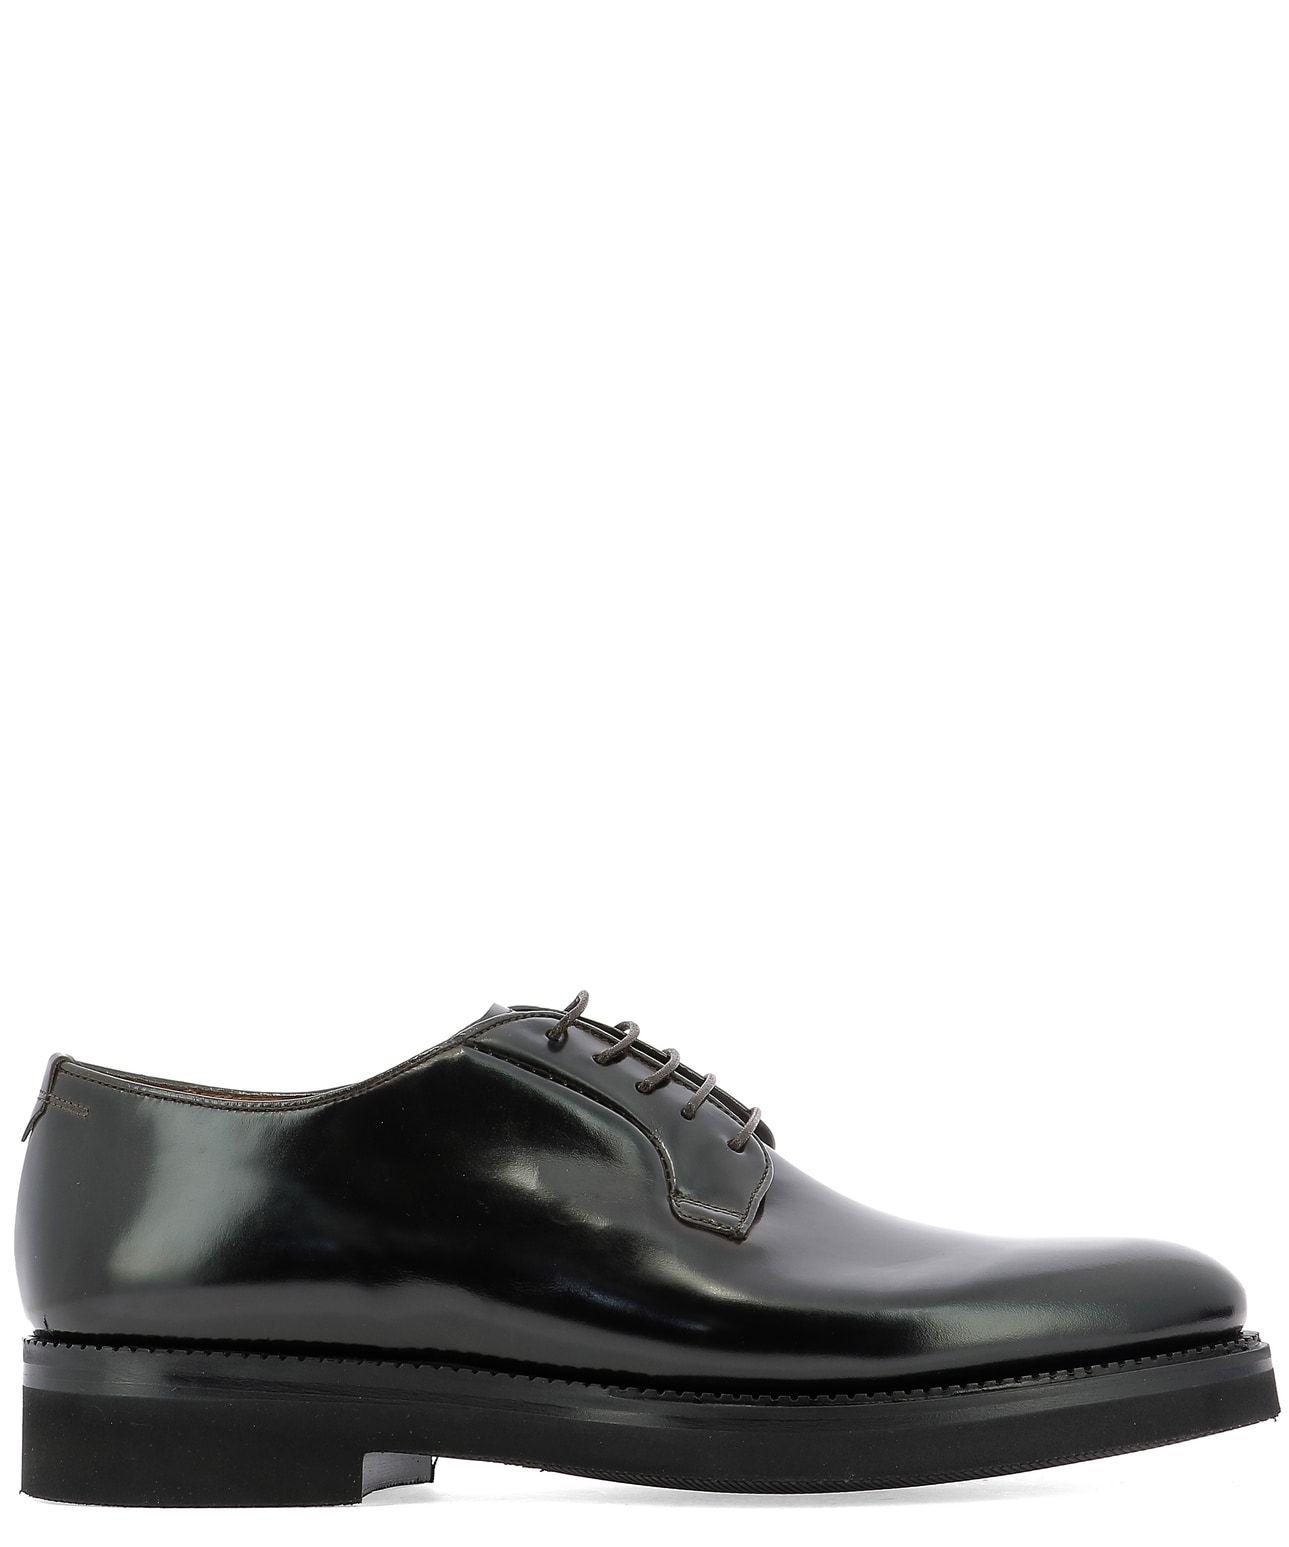 Fabi Leather Lace-up Shoes in Black for Men - Lyst